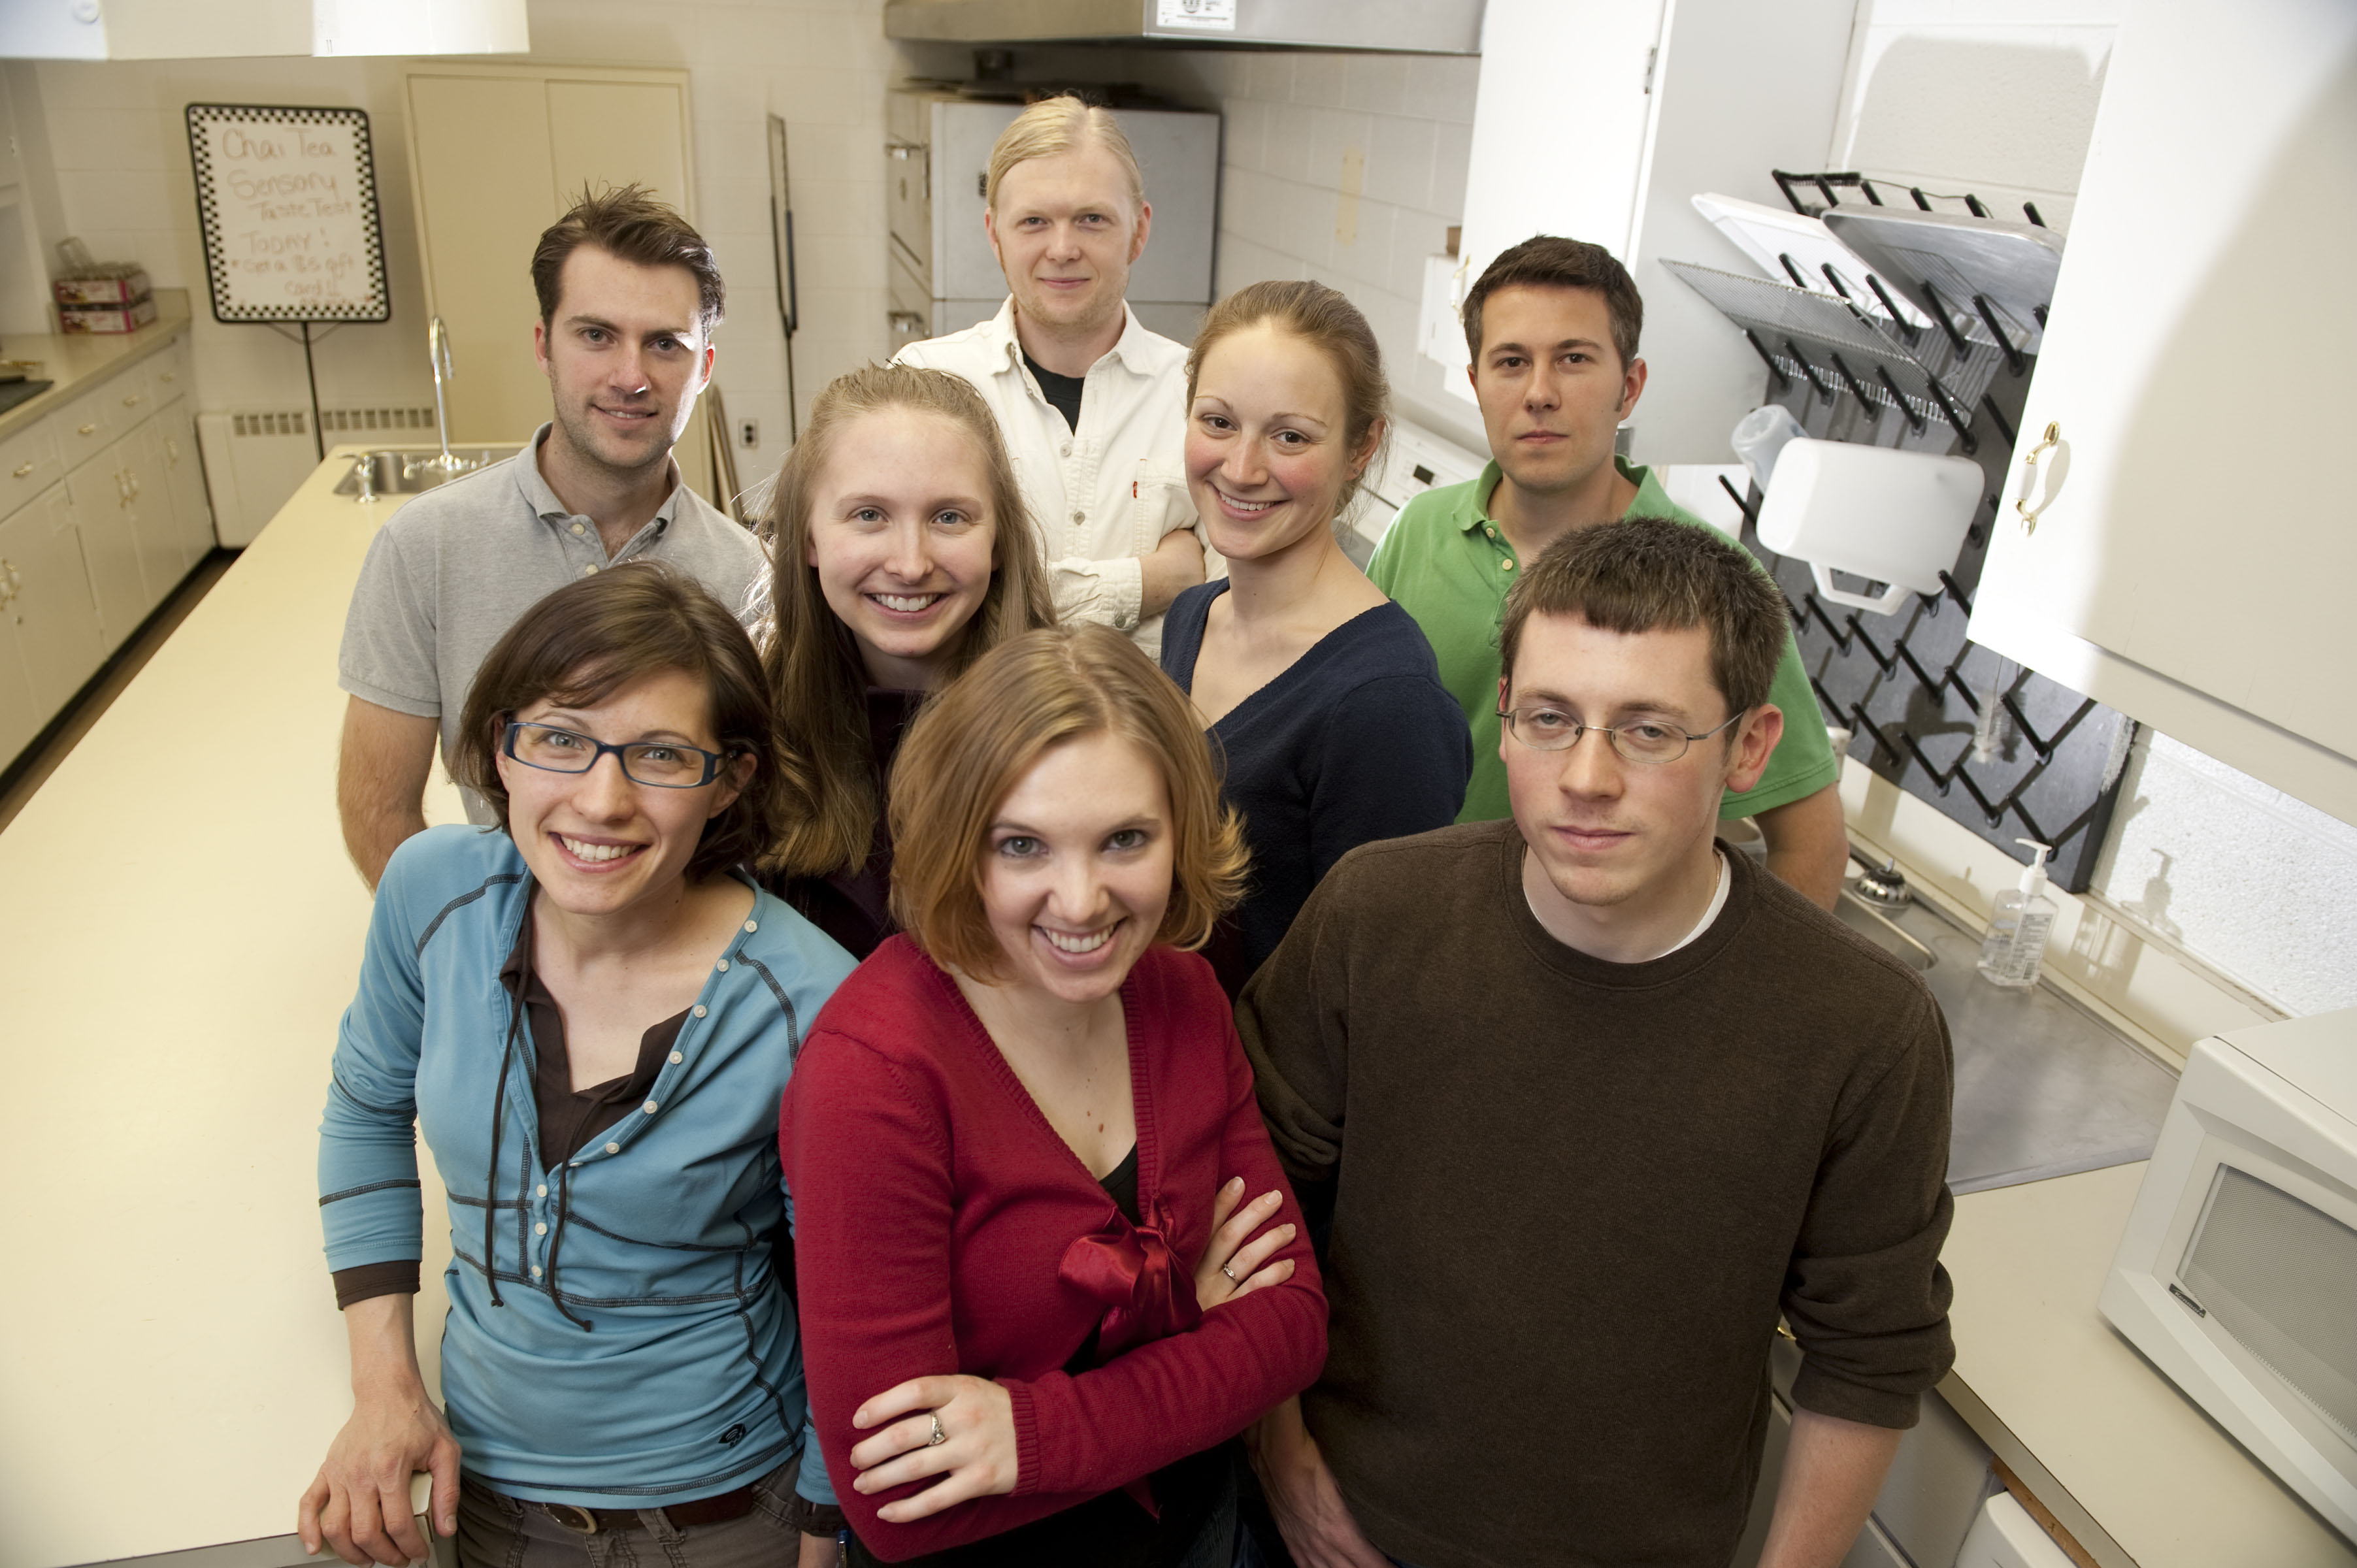 In 2009, members of Virginia Tech's Food Science Team, which includes both undergraduate and graduate members, invented a new type of meat seasoning from all natural ingredients.